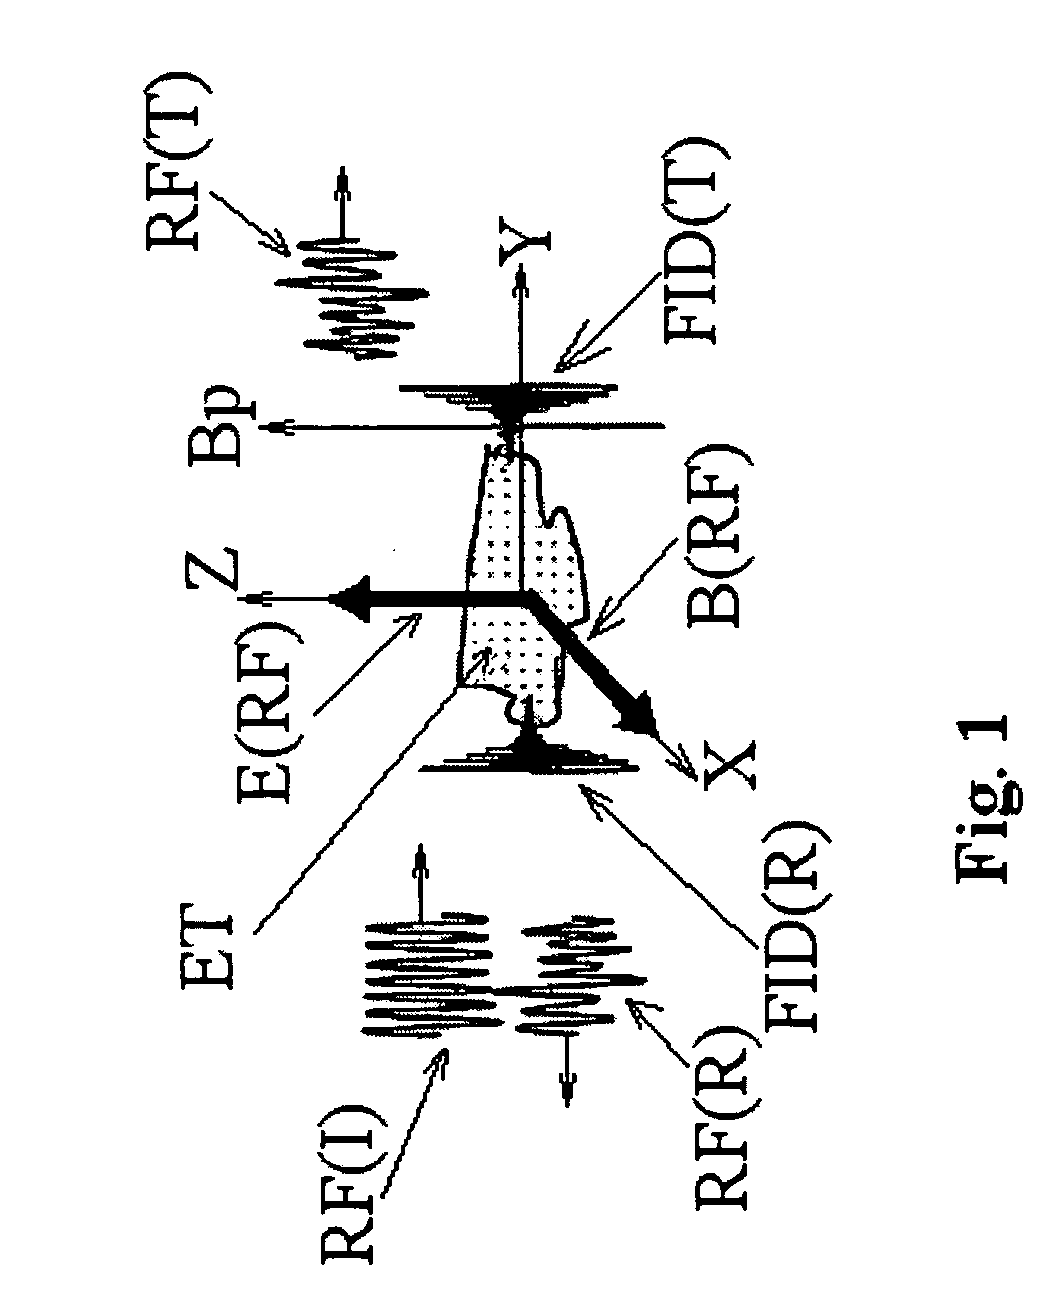 Method and apparatus for examining a substance, particularly tissue, to characterize its type